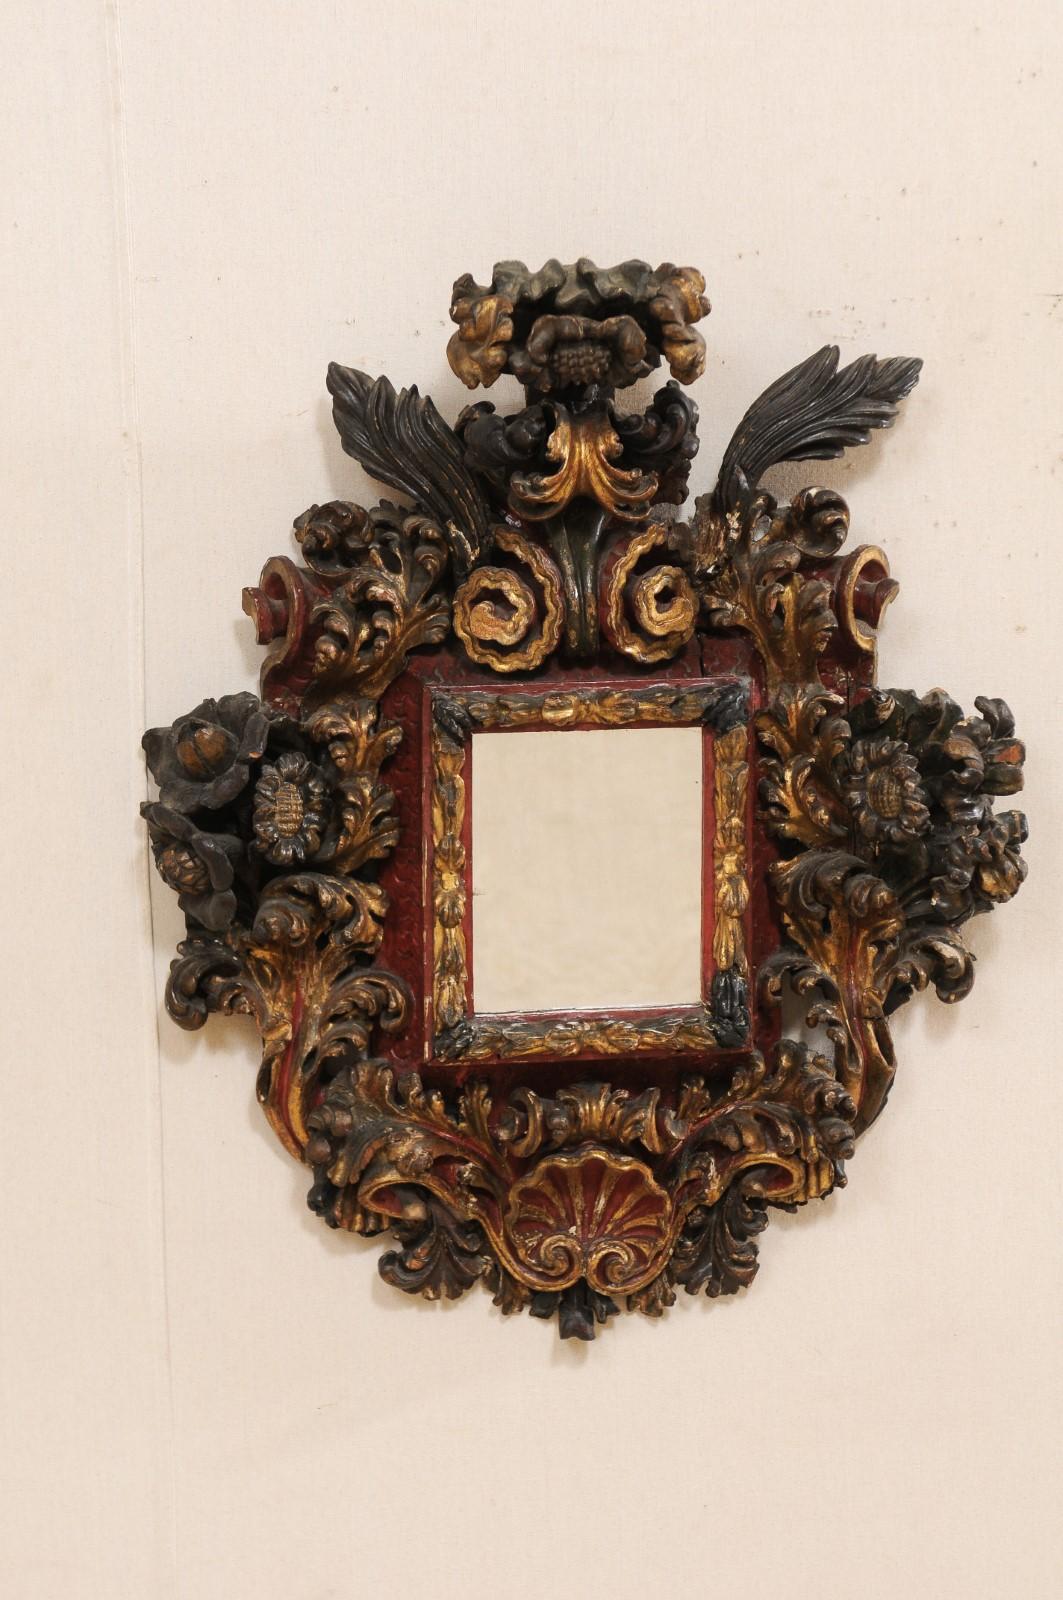 An impressive Italian baroque carved wood wall plaque with center mirror from the 18th century. This antique wall decoration from Italy features ornate three dimensional hand carvings in a shell, floral, and scrolling acanthus leaf motif, about a